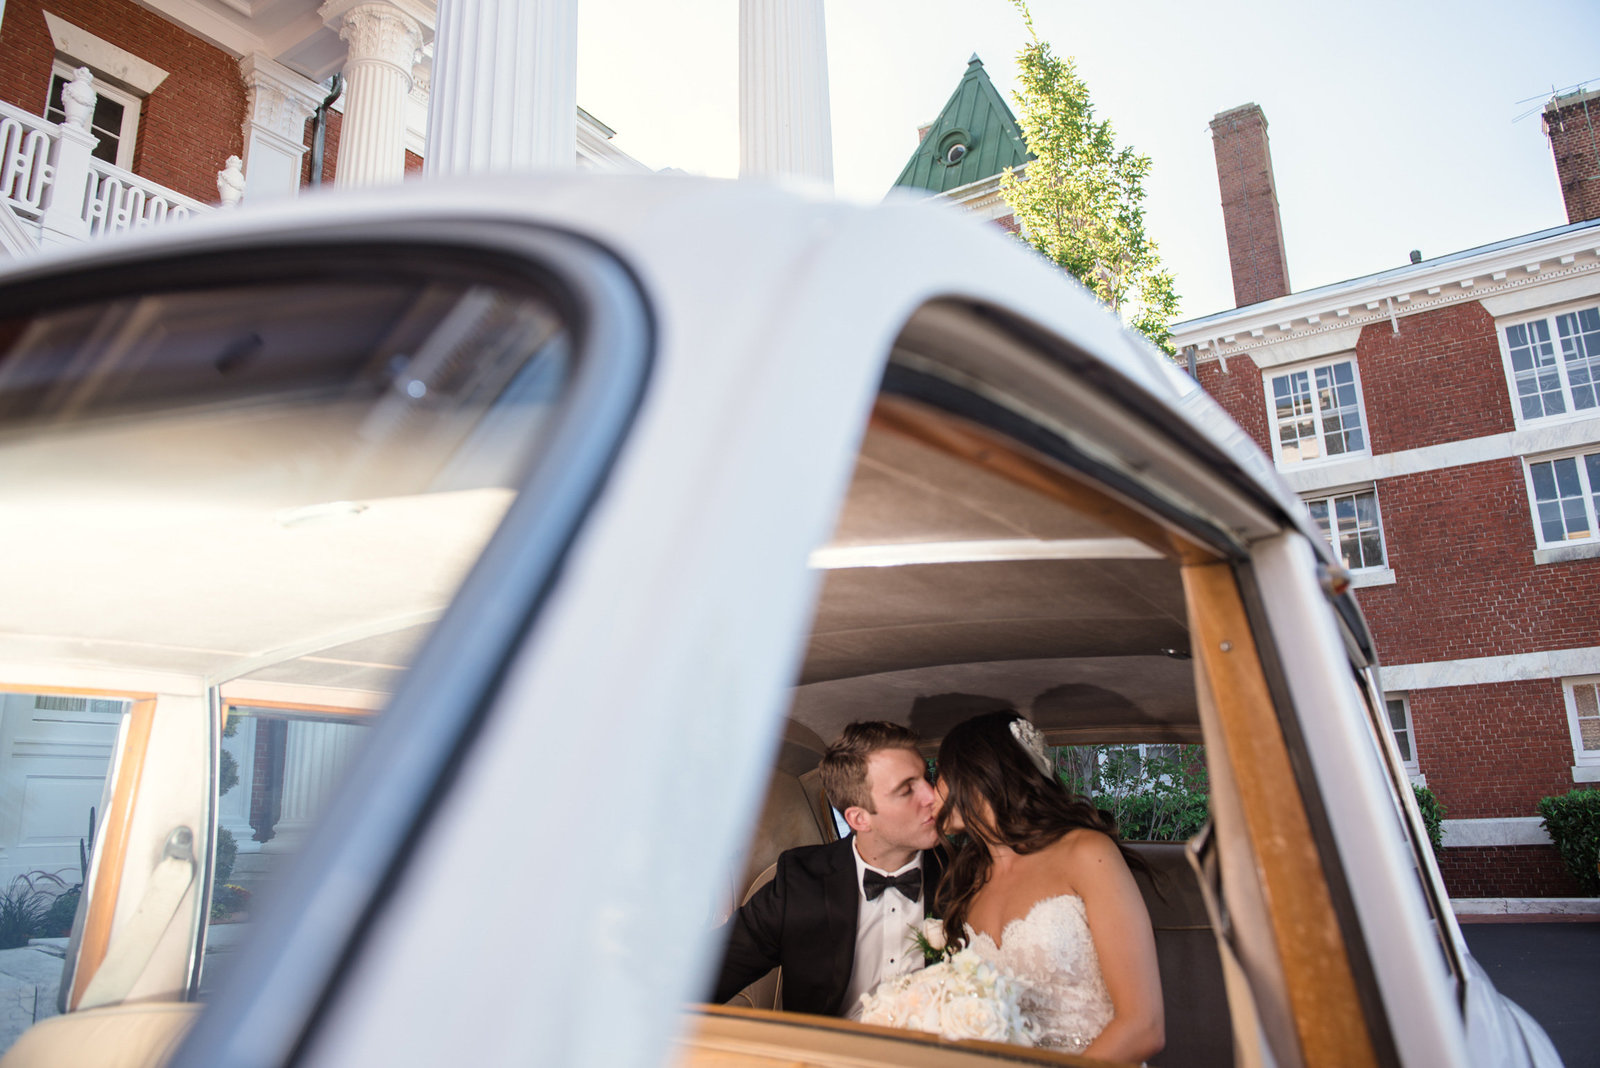 Bride and groom kissing in a vintage car in front of the Bourne Mansion